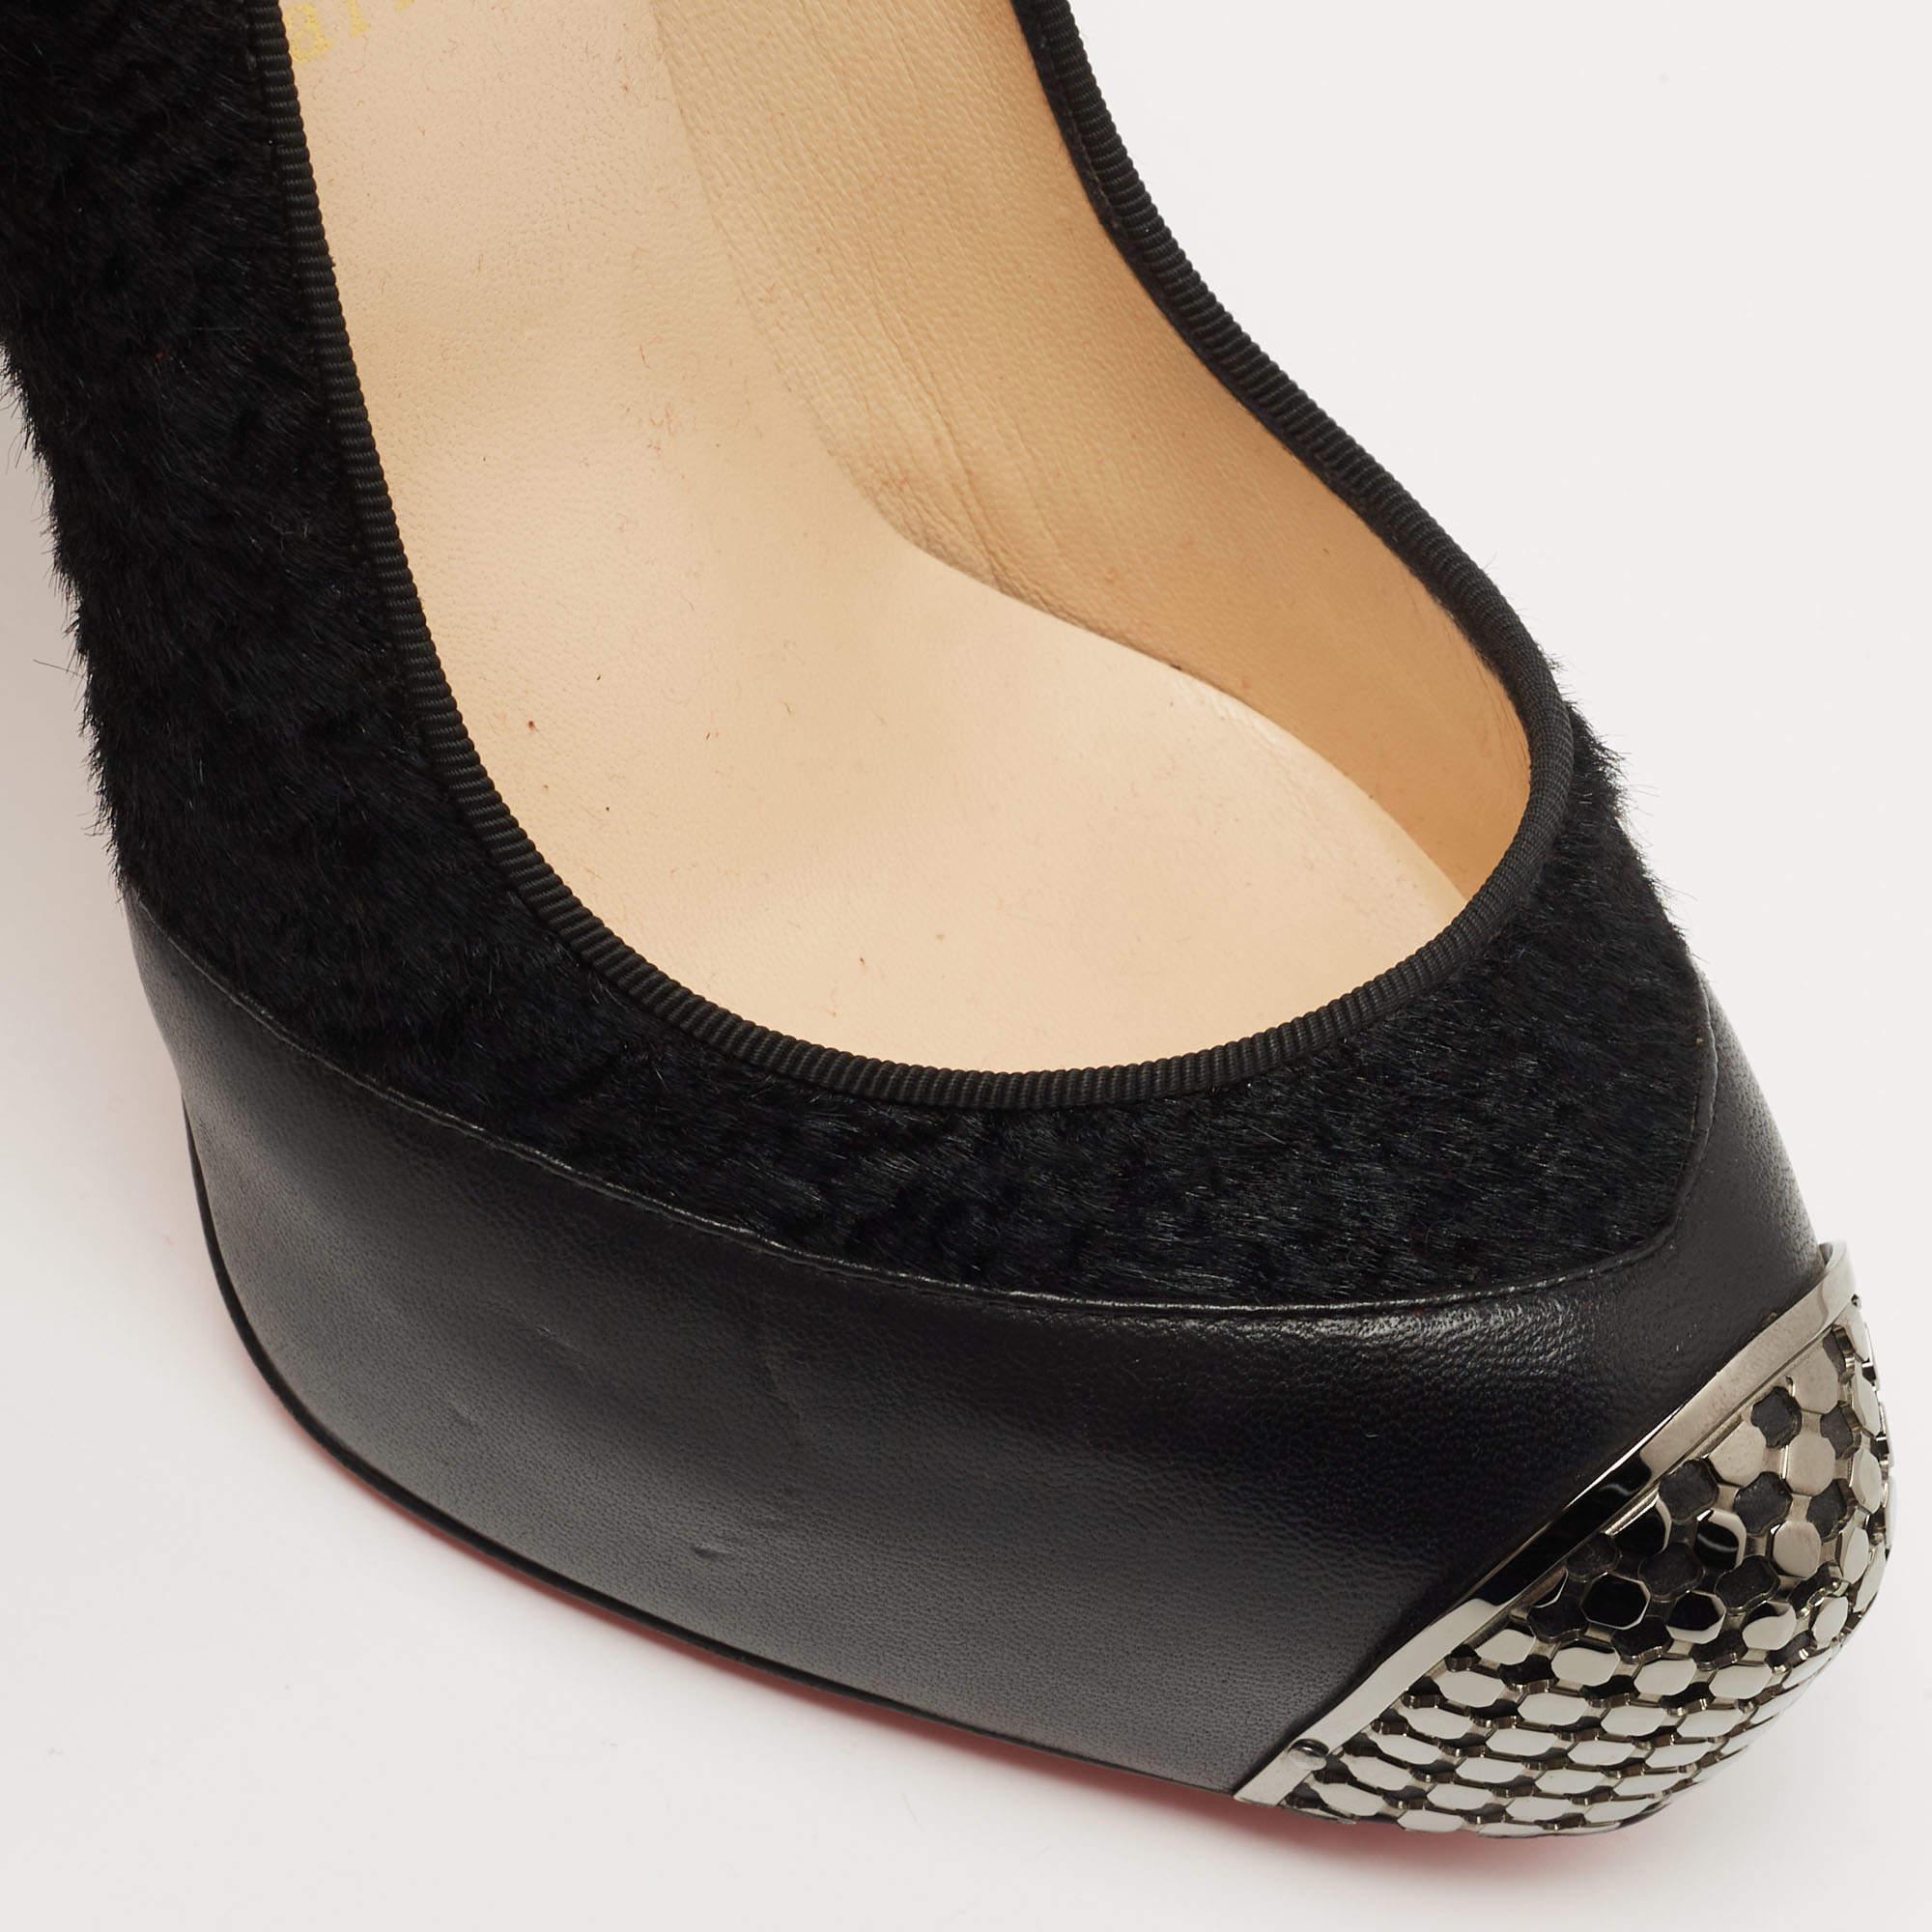 Christian Louboutin Black Calfhair and Leather Maggie Pumps Size 40 For Sale 2